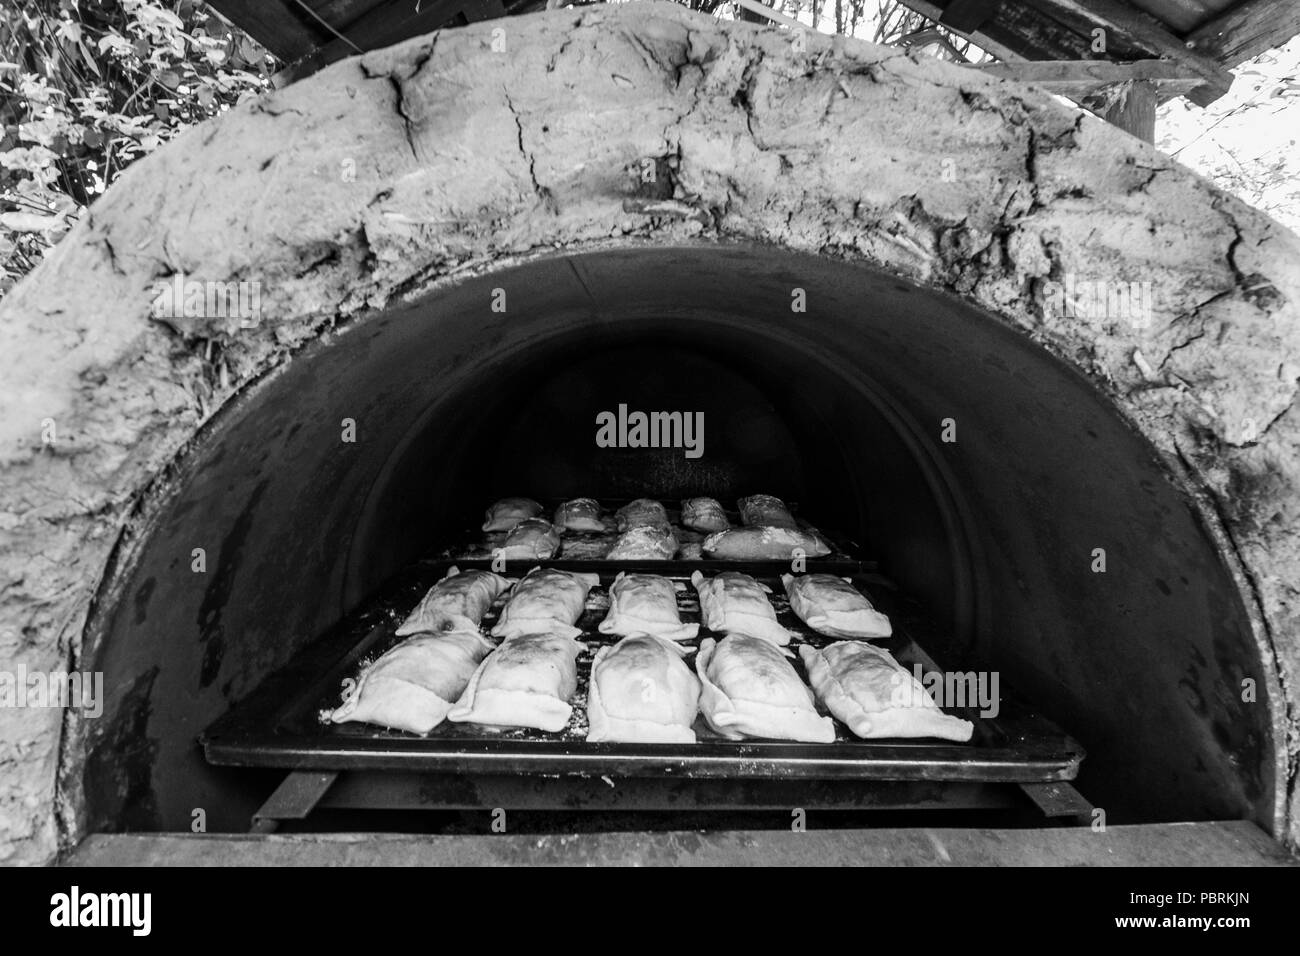 Traditional bread baking and traditional Pine pies at Chile inside a stone homemade oven Stock Photo